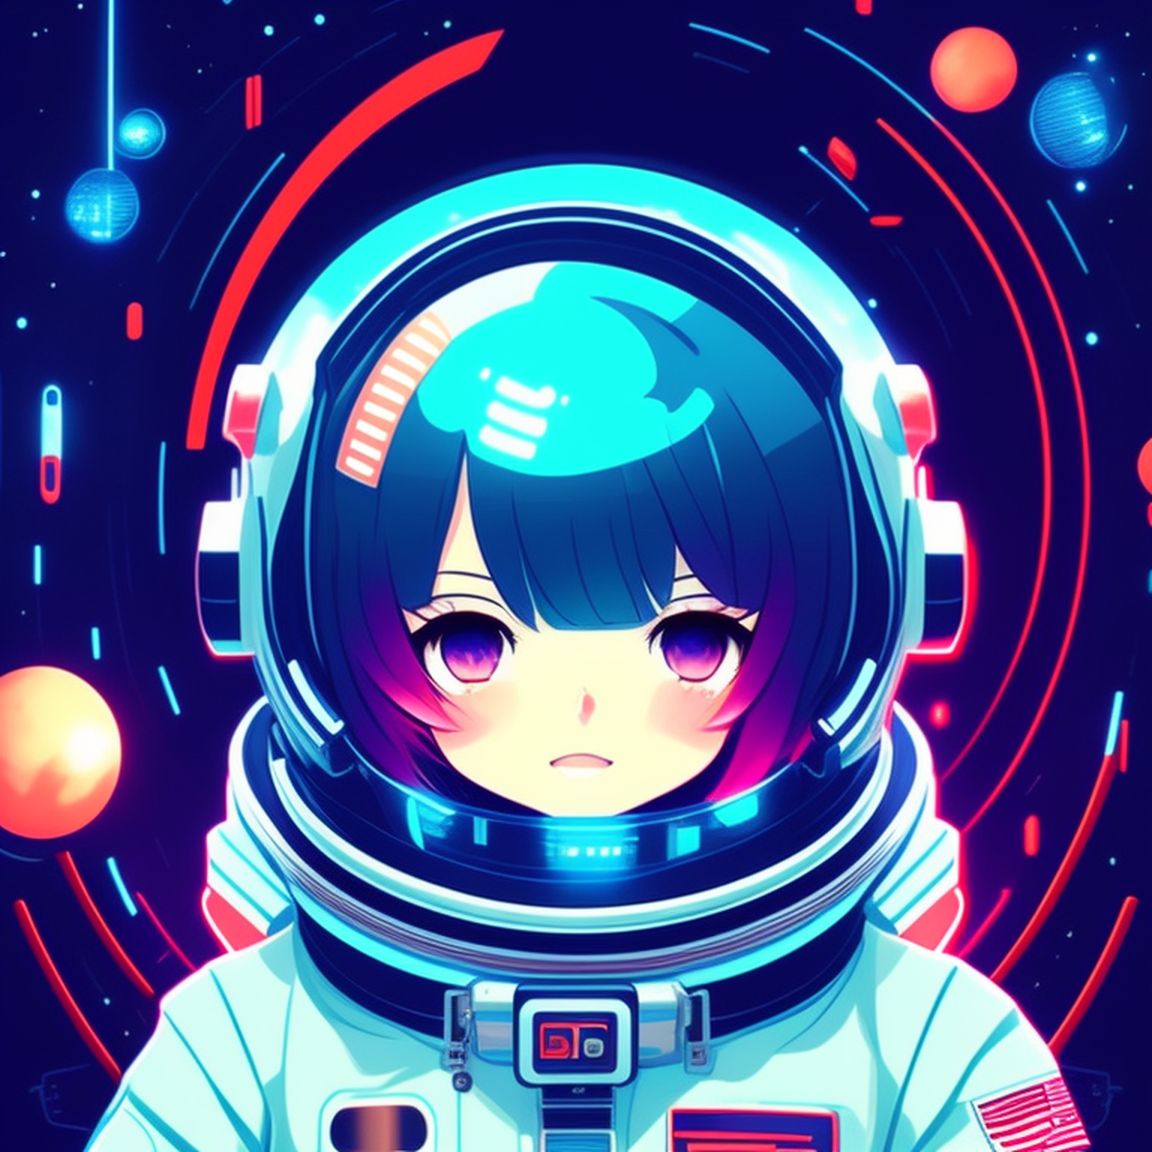 fancy-deer752: Anime Girl cybercore Futuristic blue Astronaut Gaming Style